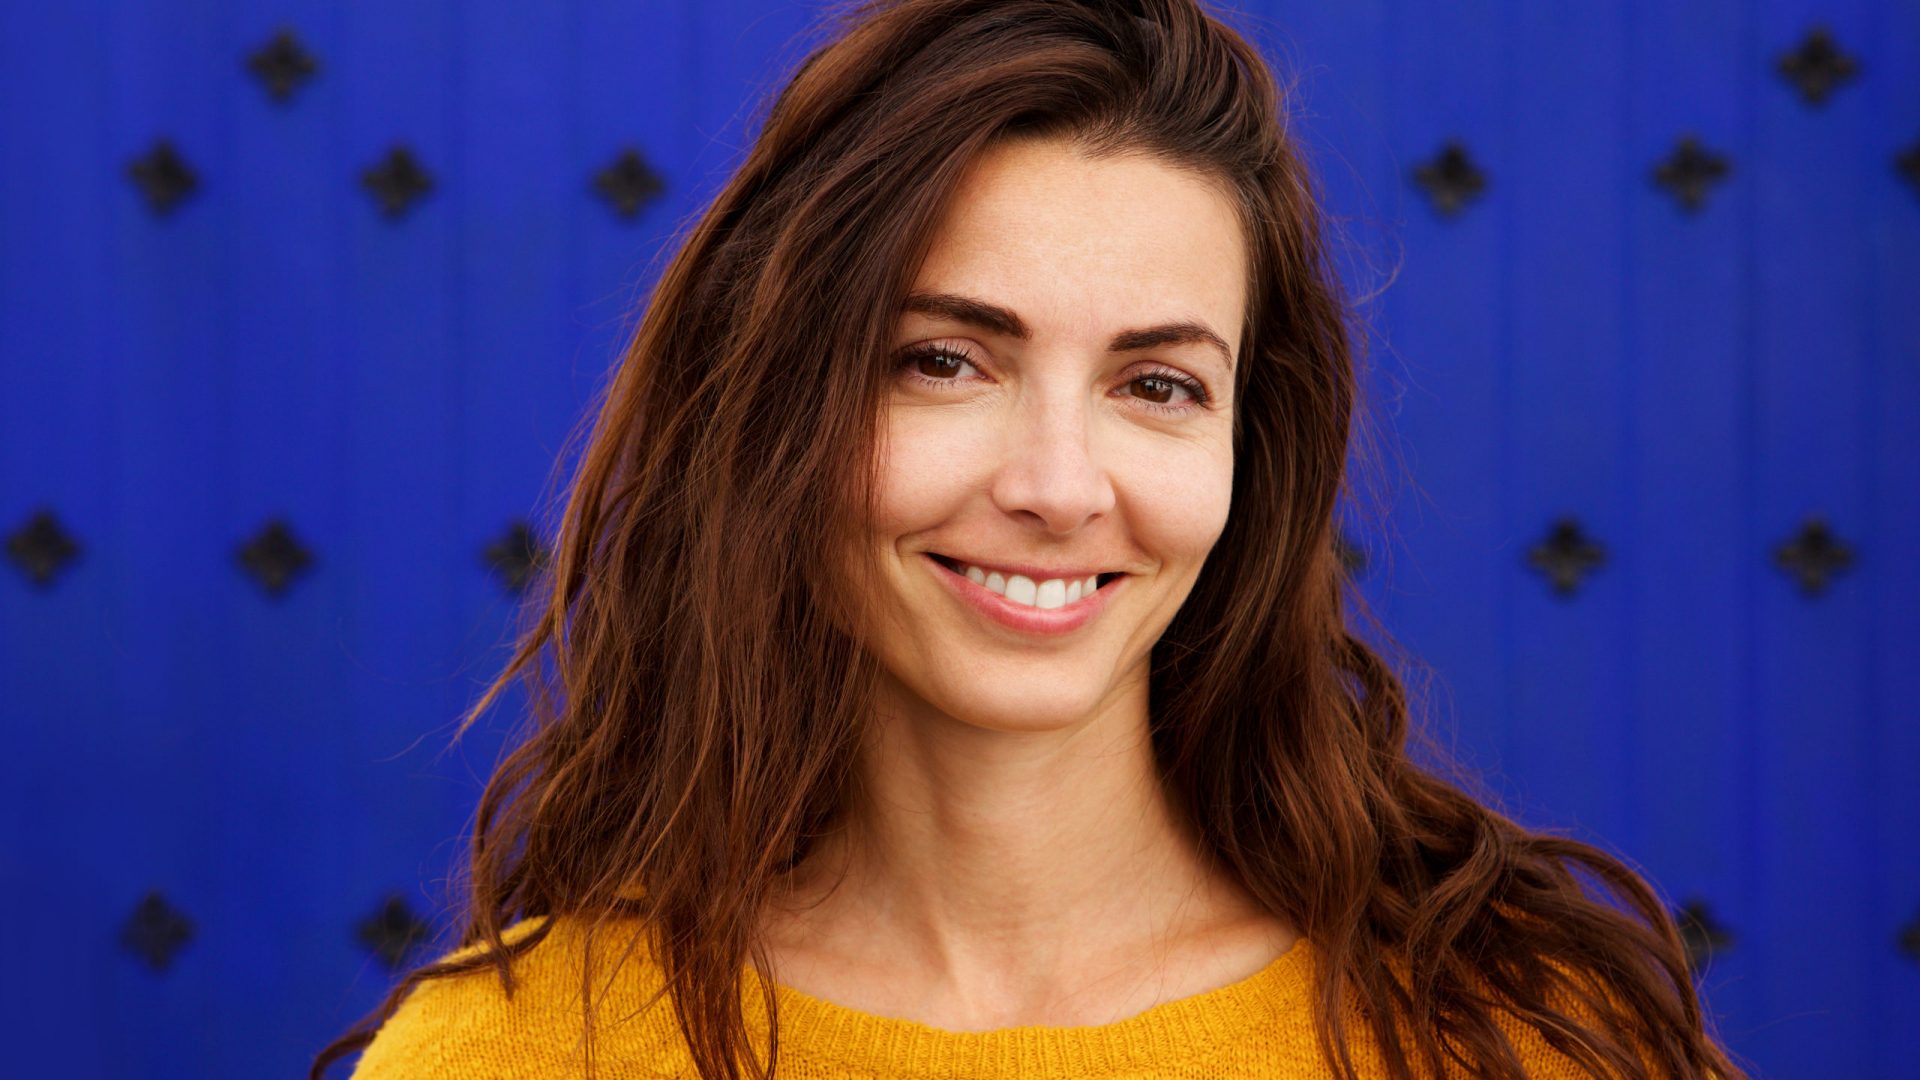 Close up portrait of beautiful young woman smiling against blue background